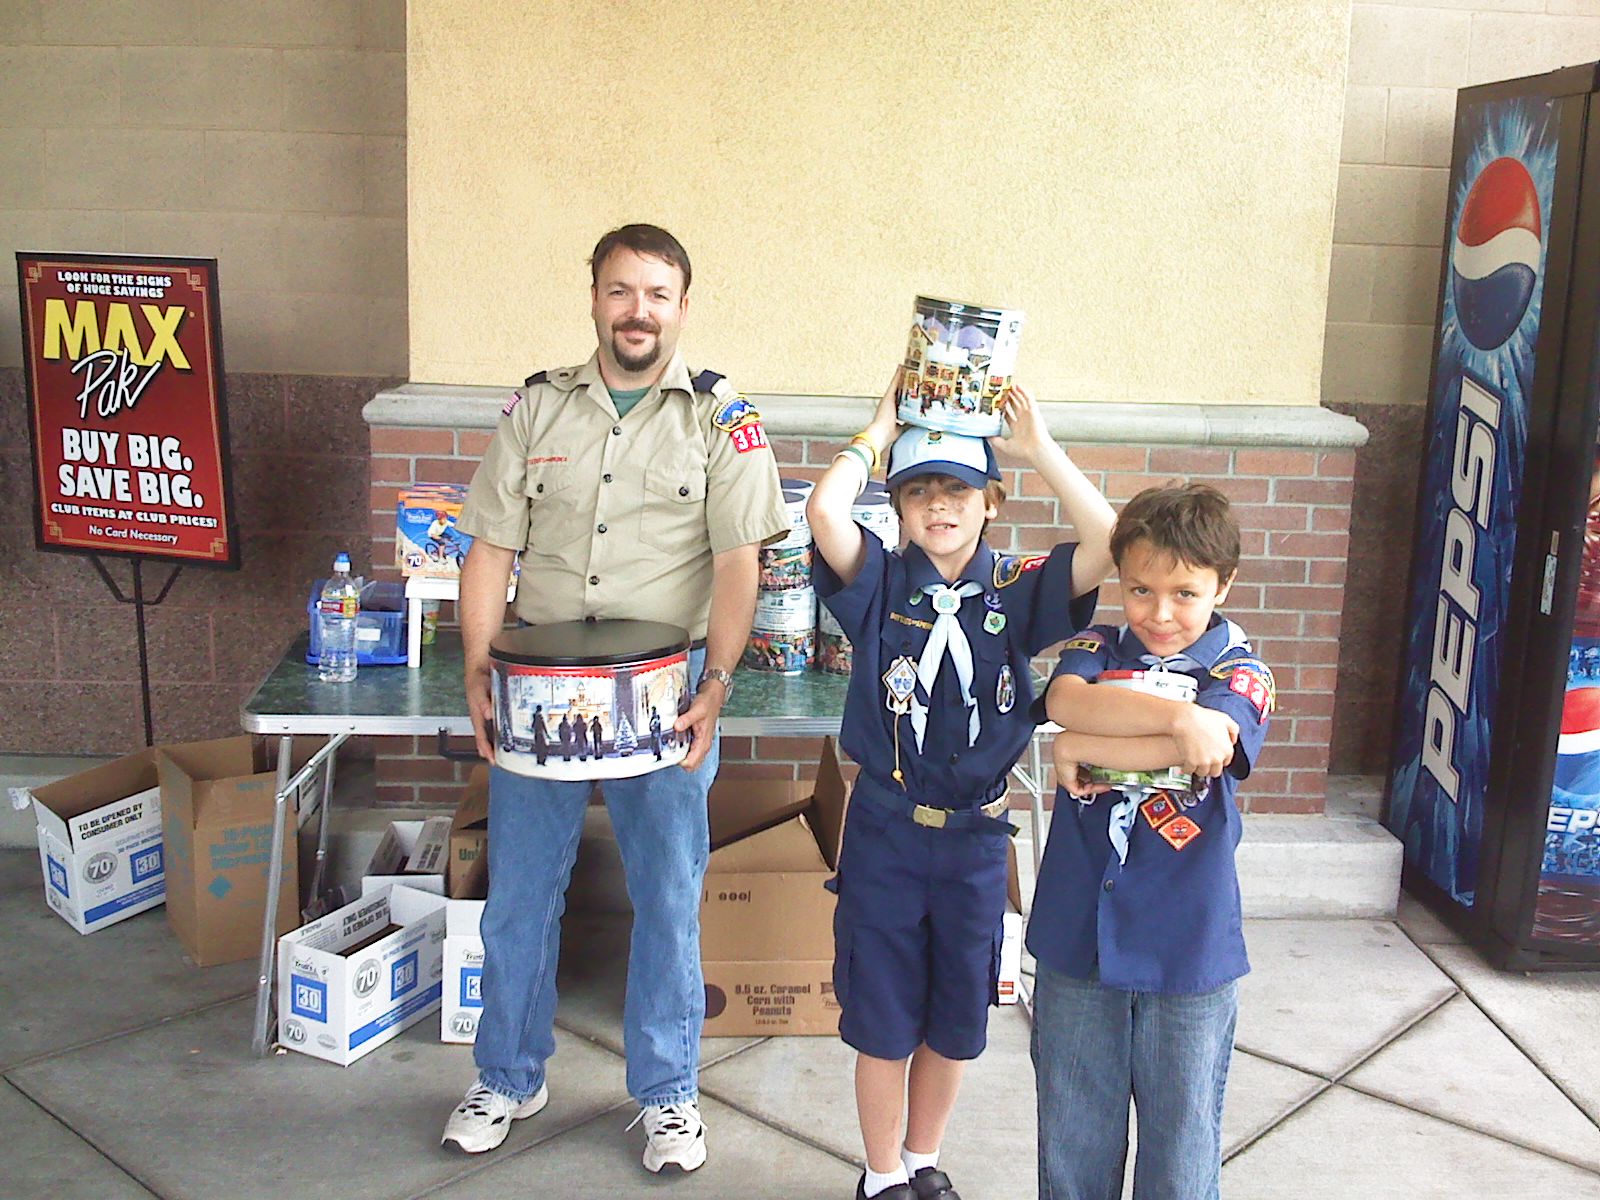 Selling popcorn for the scouts